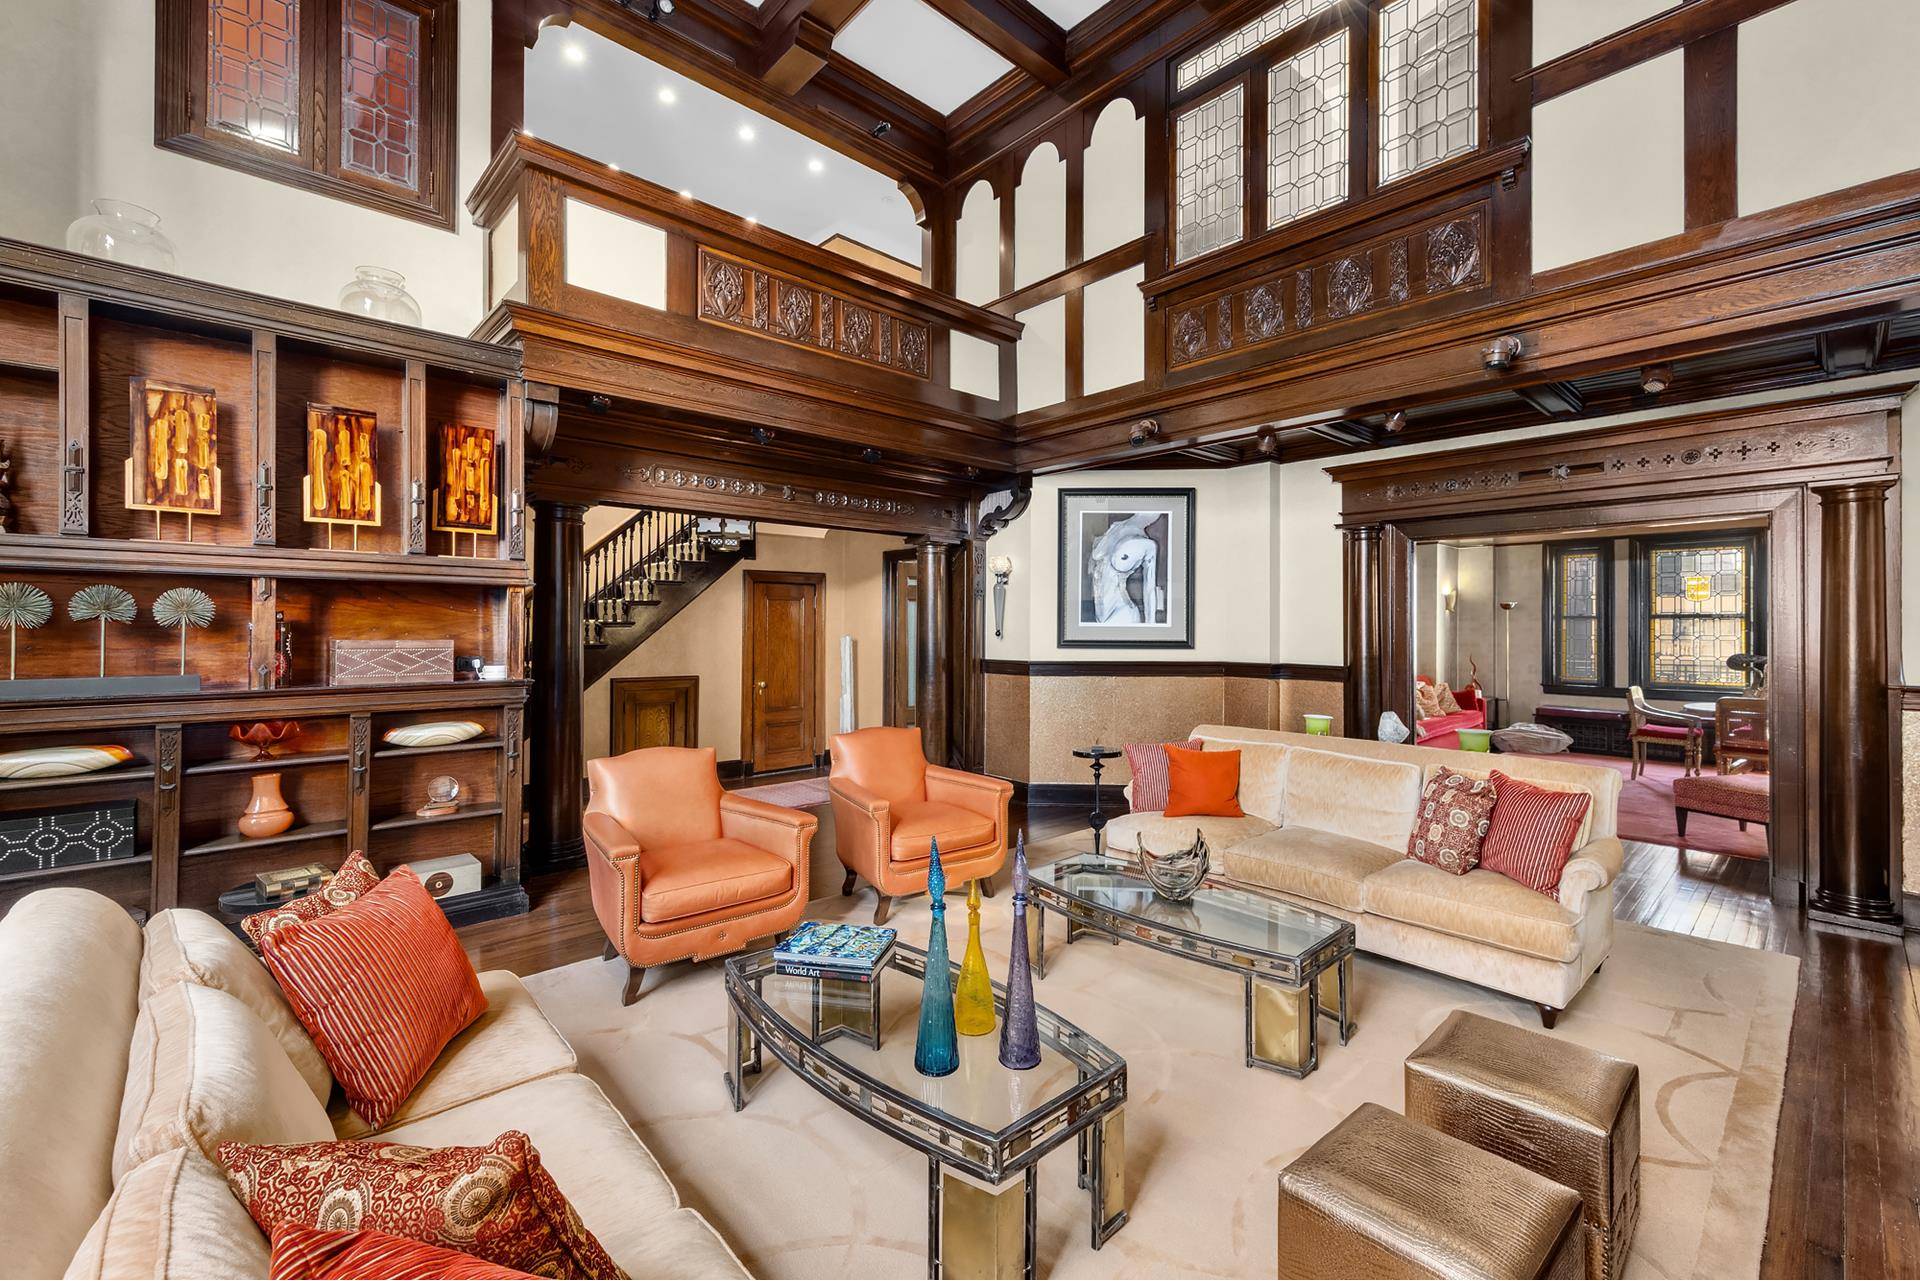 In the heart of Manhattan's Upper West Side, a remarkable duplex in a 1909 Italian Renaissance style building offers a unique blend of historical elegance and modern functionality.